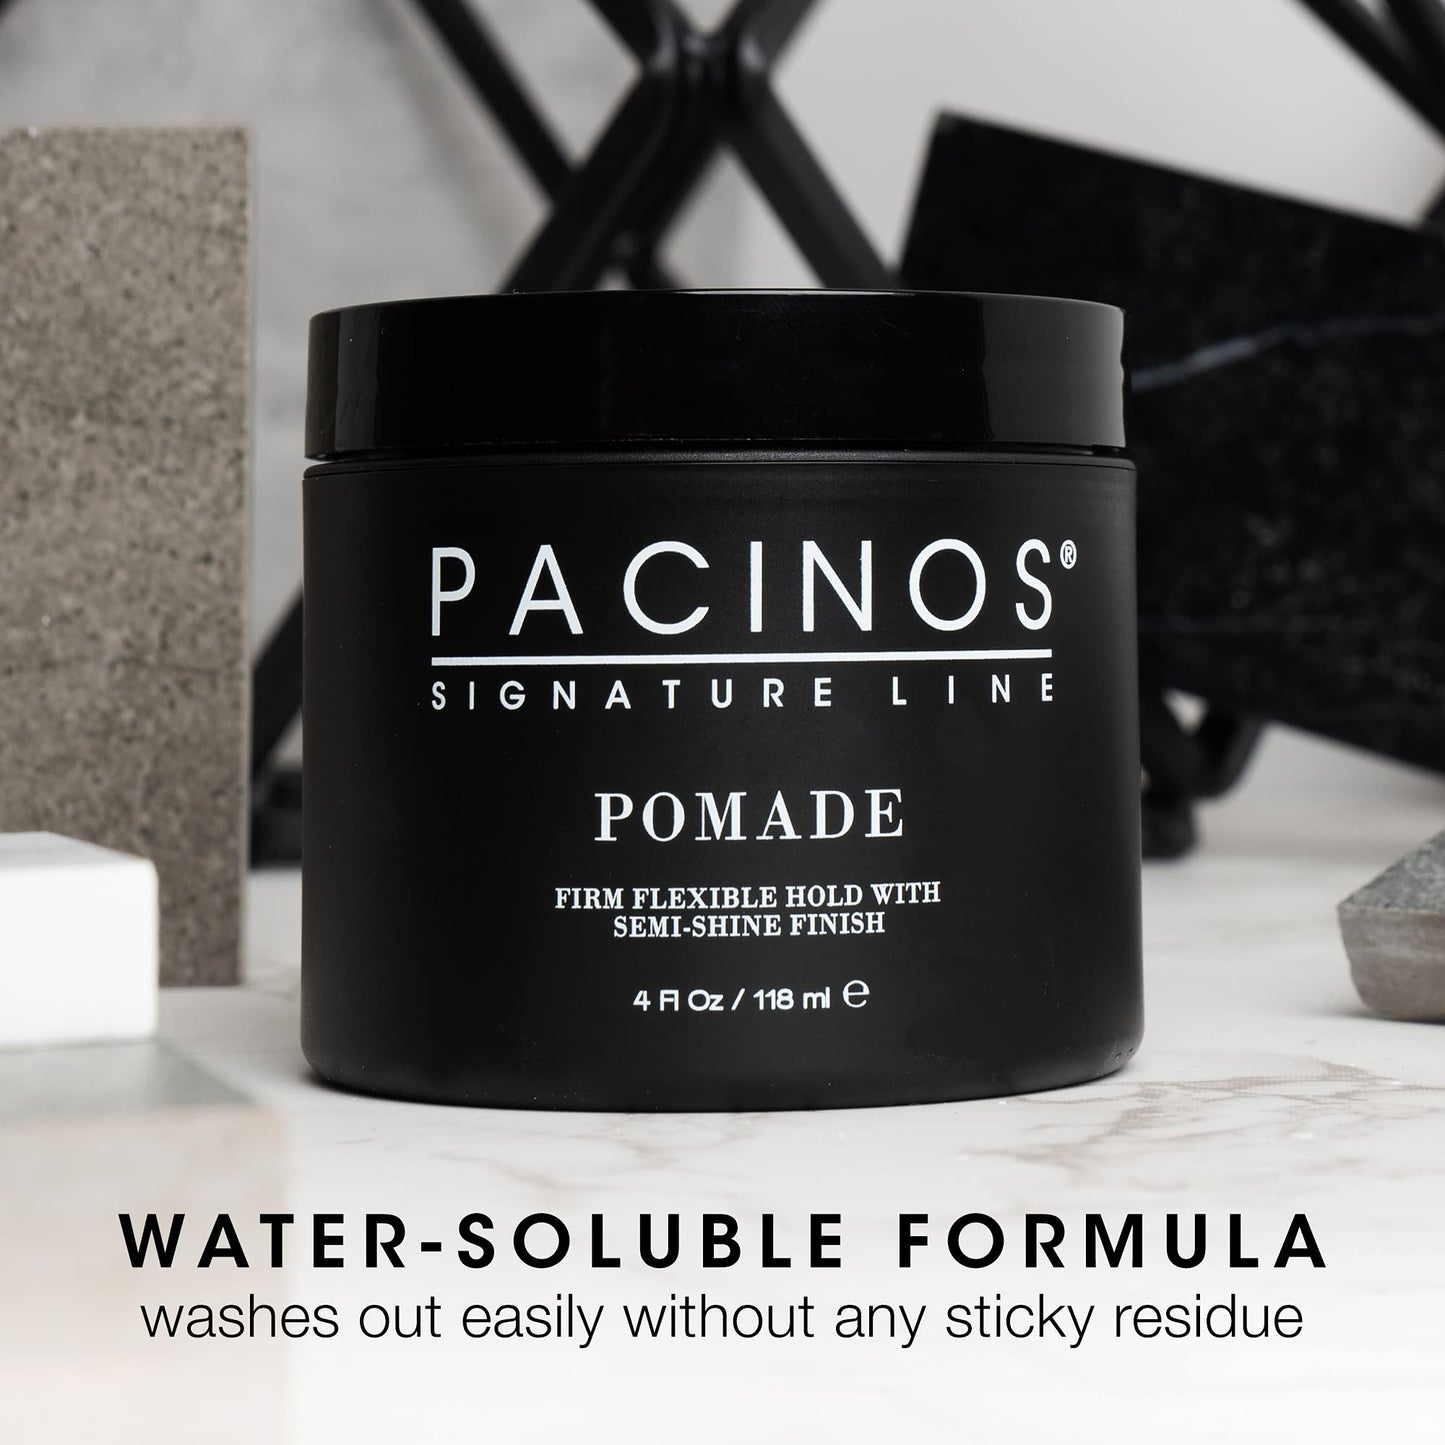 Pacinos Pomade - Flexible Hold, Frizz Control - High Shine Pomade for All Hair Types - 4oz